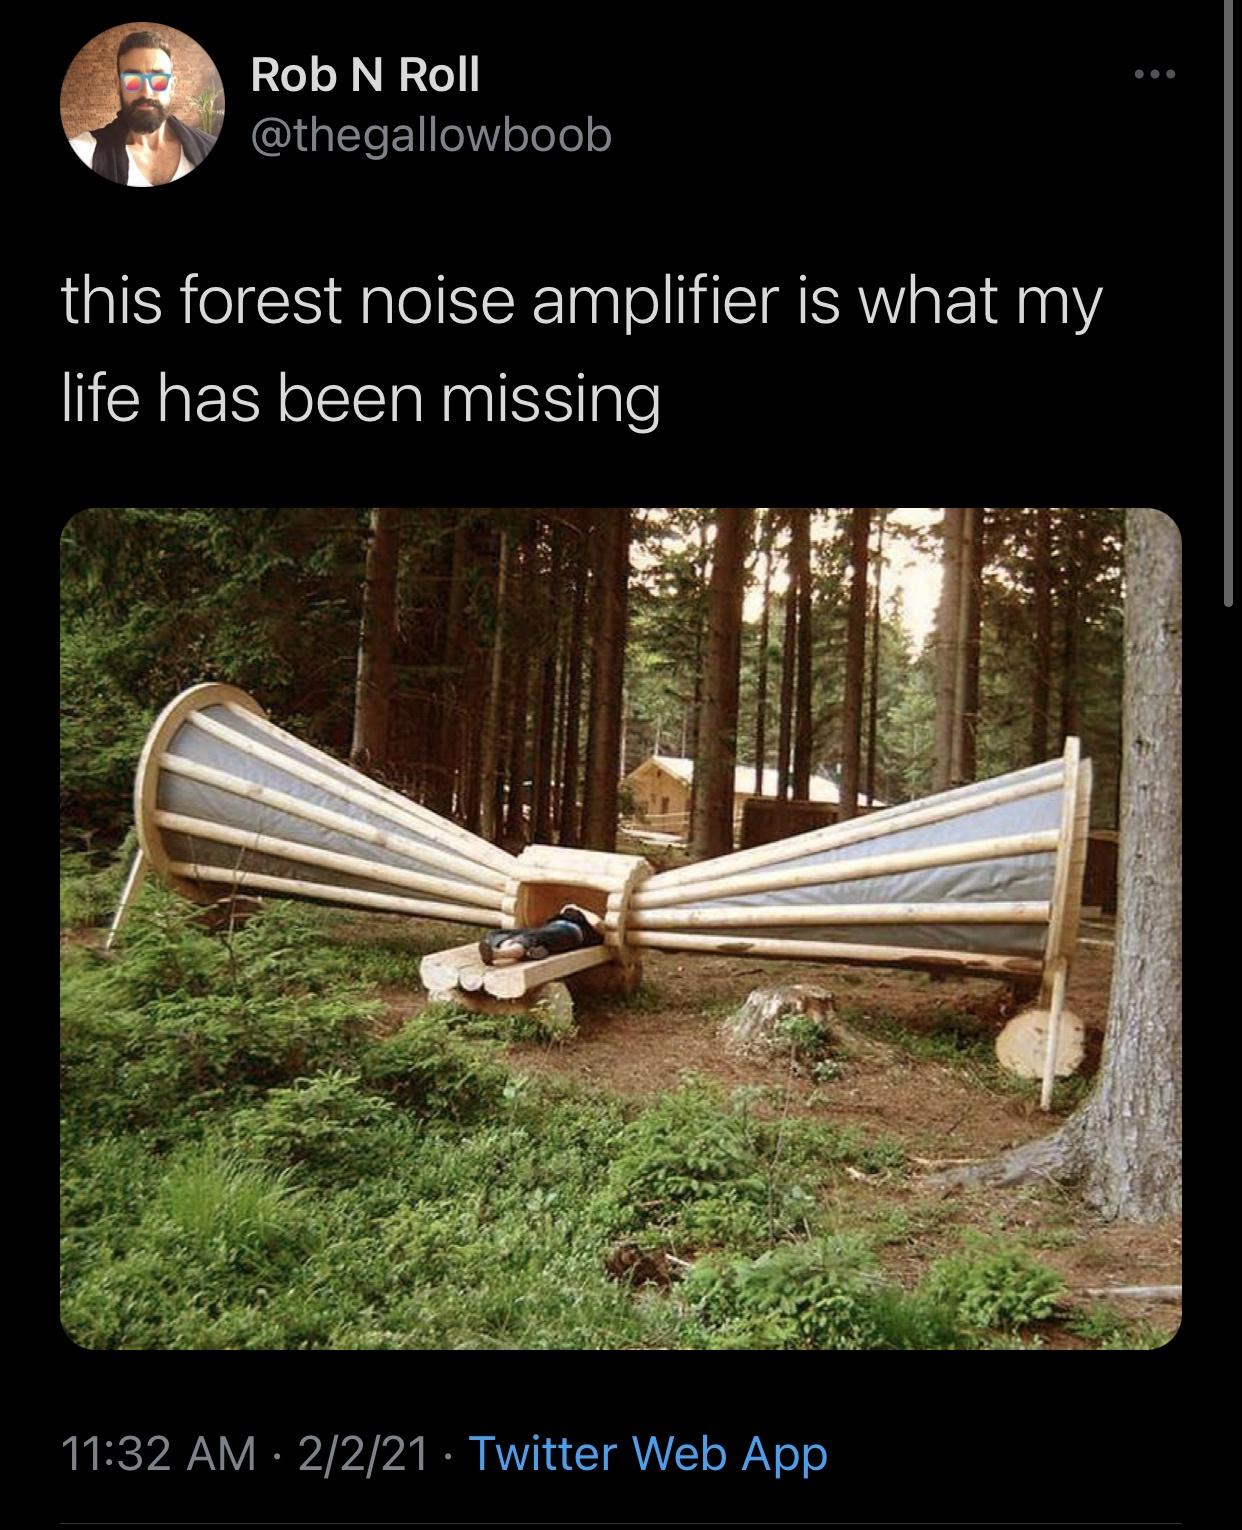 wood - Rob N Roll this forest noise amplifier is what my life has been missing 2221 Twitter Web App